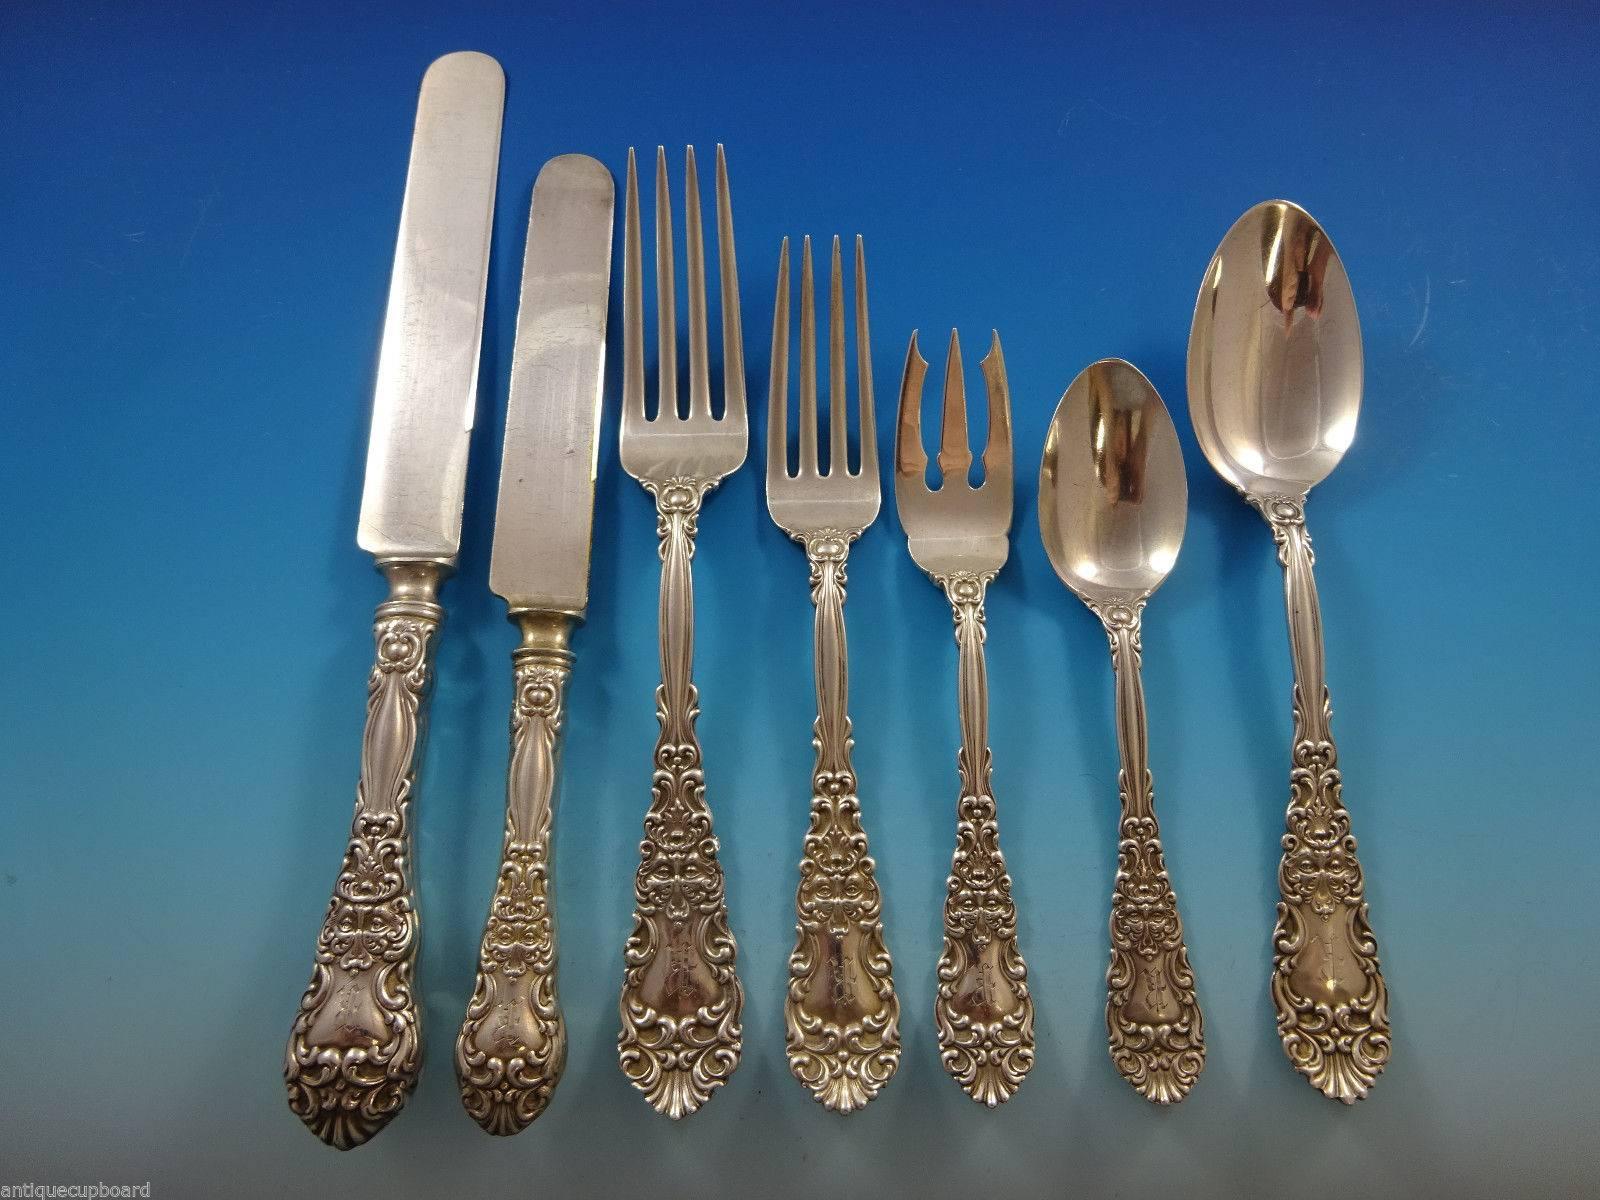 Renaissance by Dominick & Haff sterling silver dinner and luncheon size flatware set of 44 pieces. This scarce figural pattern features a North Wind Face on the handle and on the back of the spoon bowls in fine detail. This set includes:

Six dinner